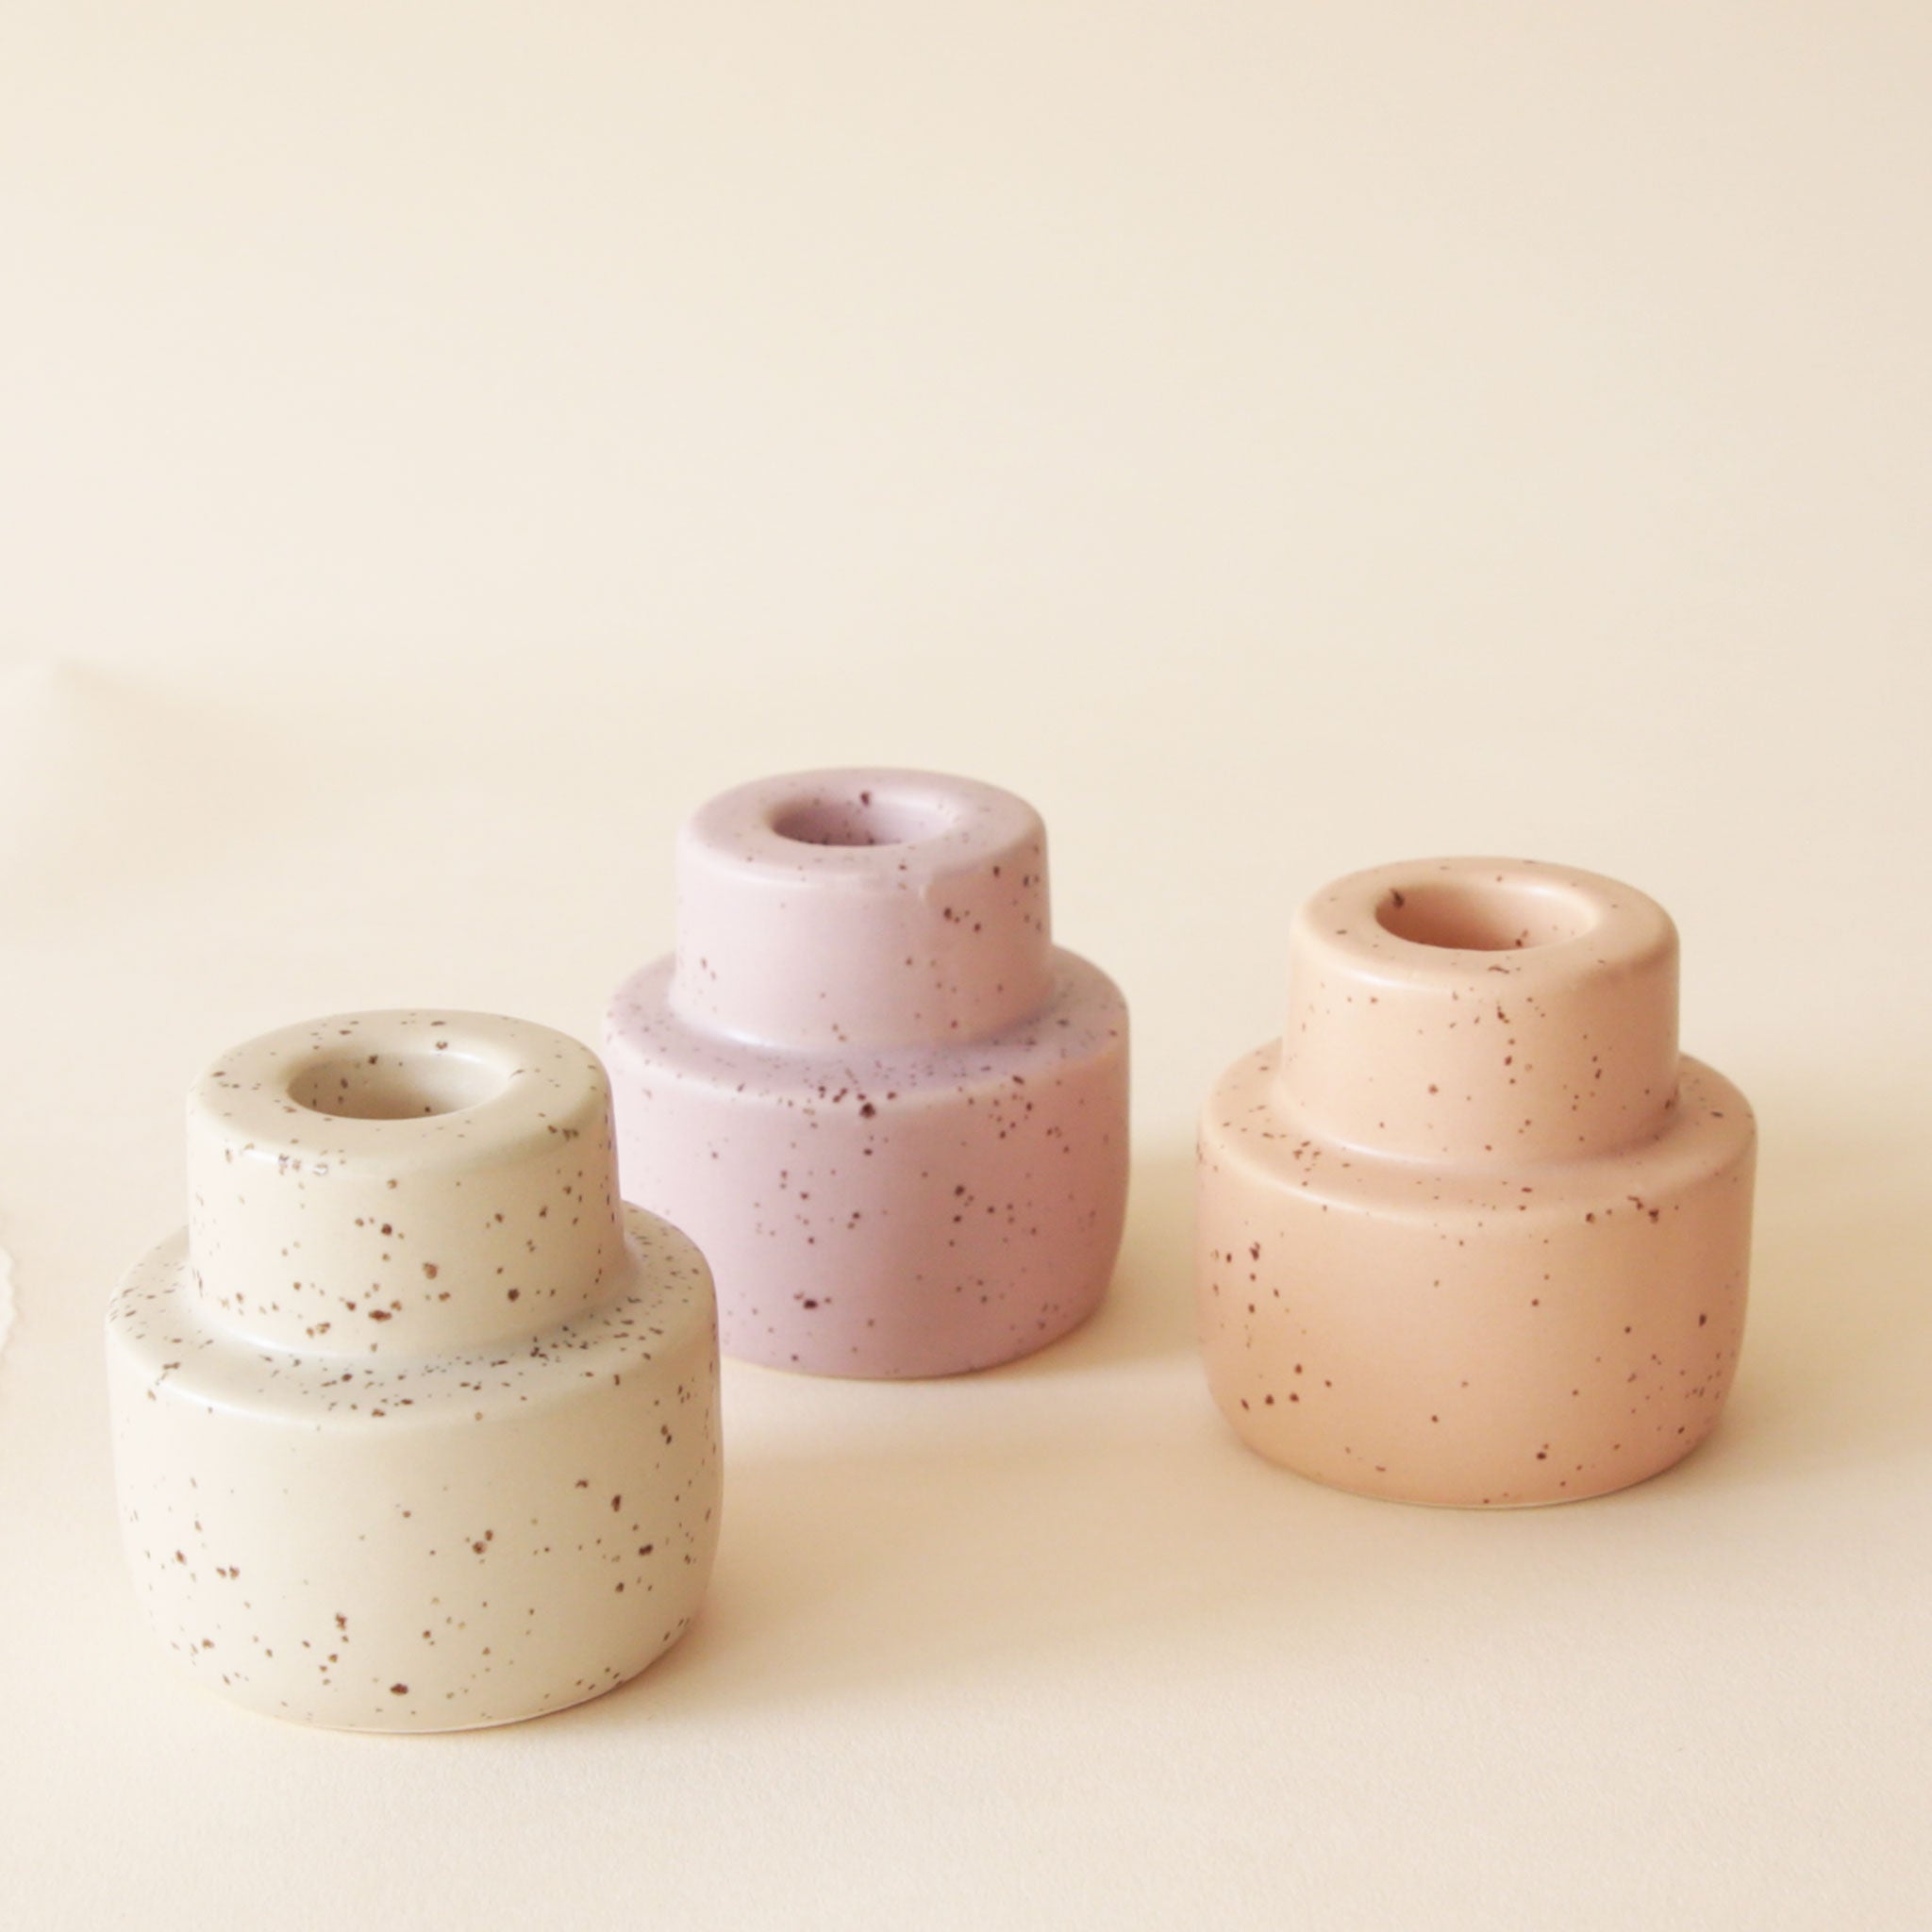 On a neutral background is three different ceramic candle holders in a neutral shade, light peach and light purple. 